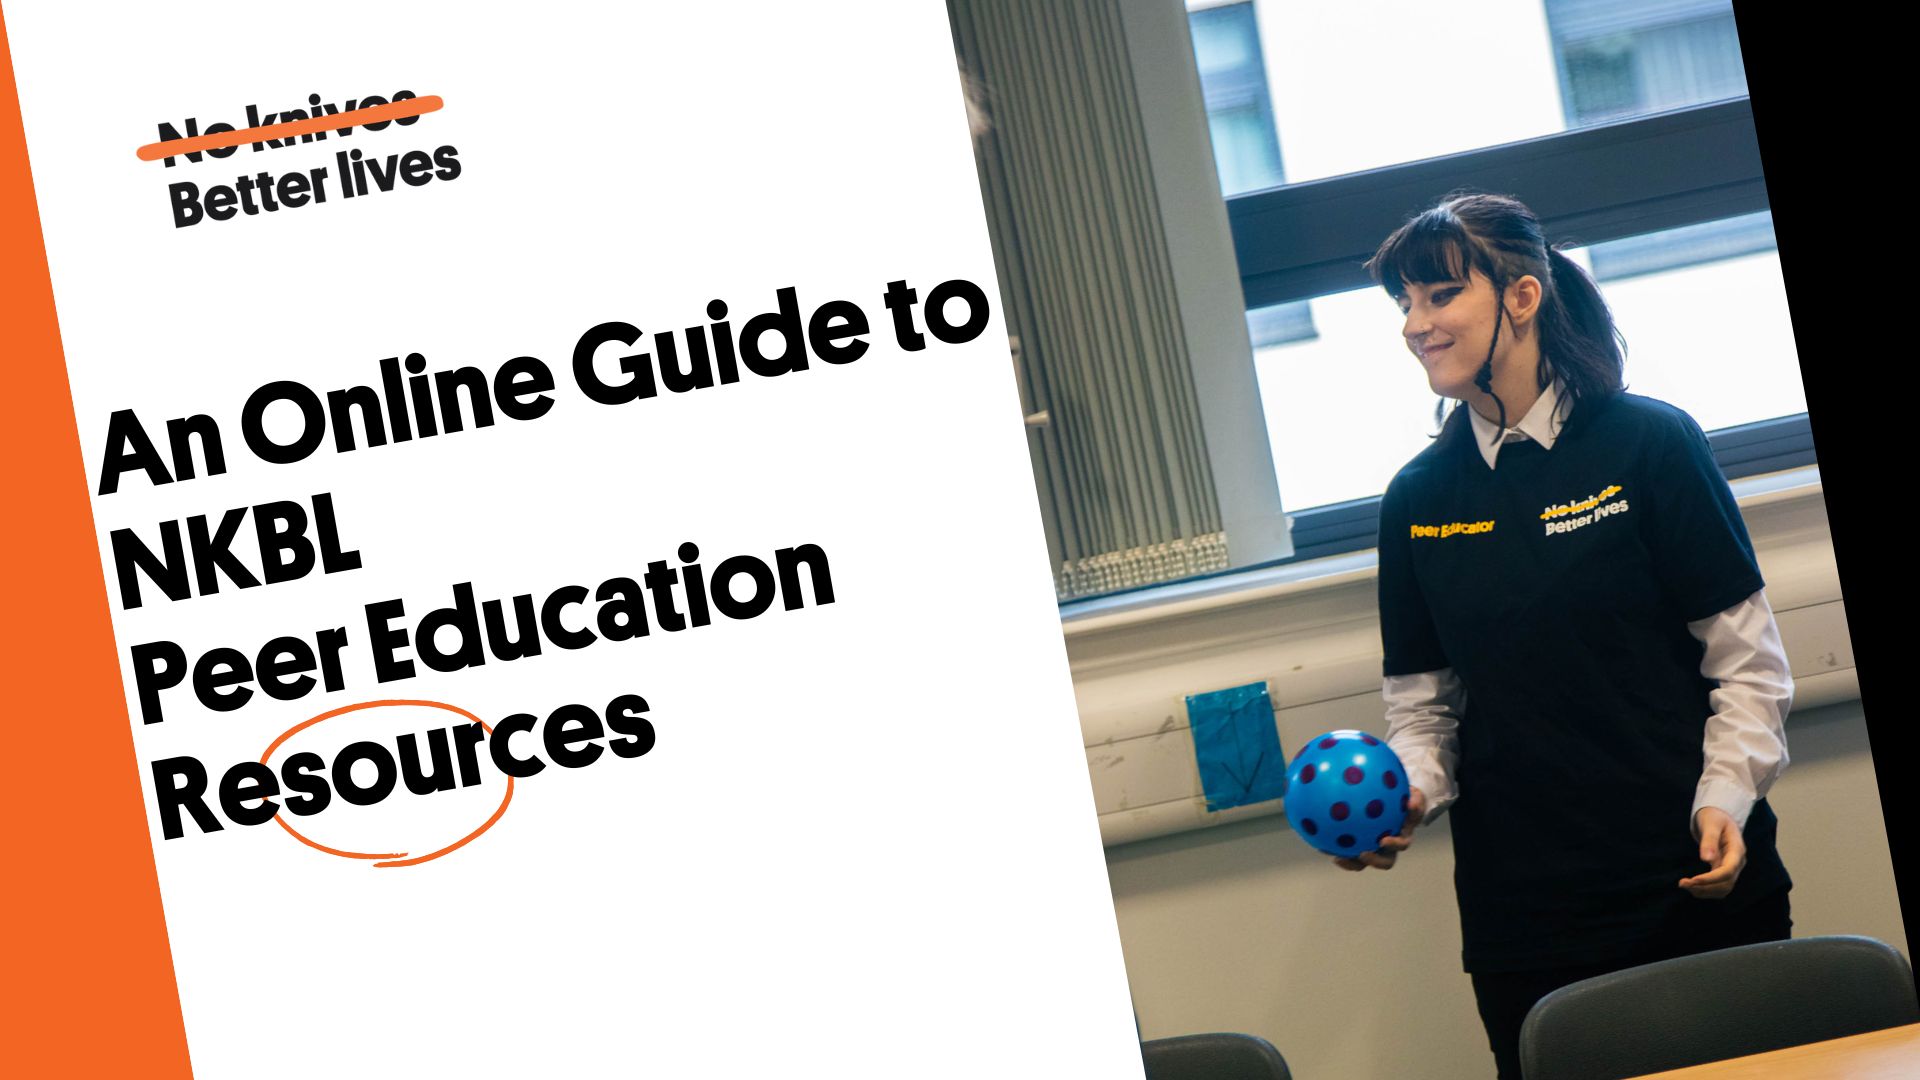 An Online Guide to Using NKBL Peer Education Resources